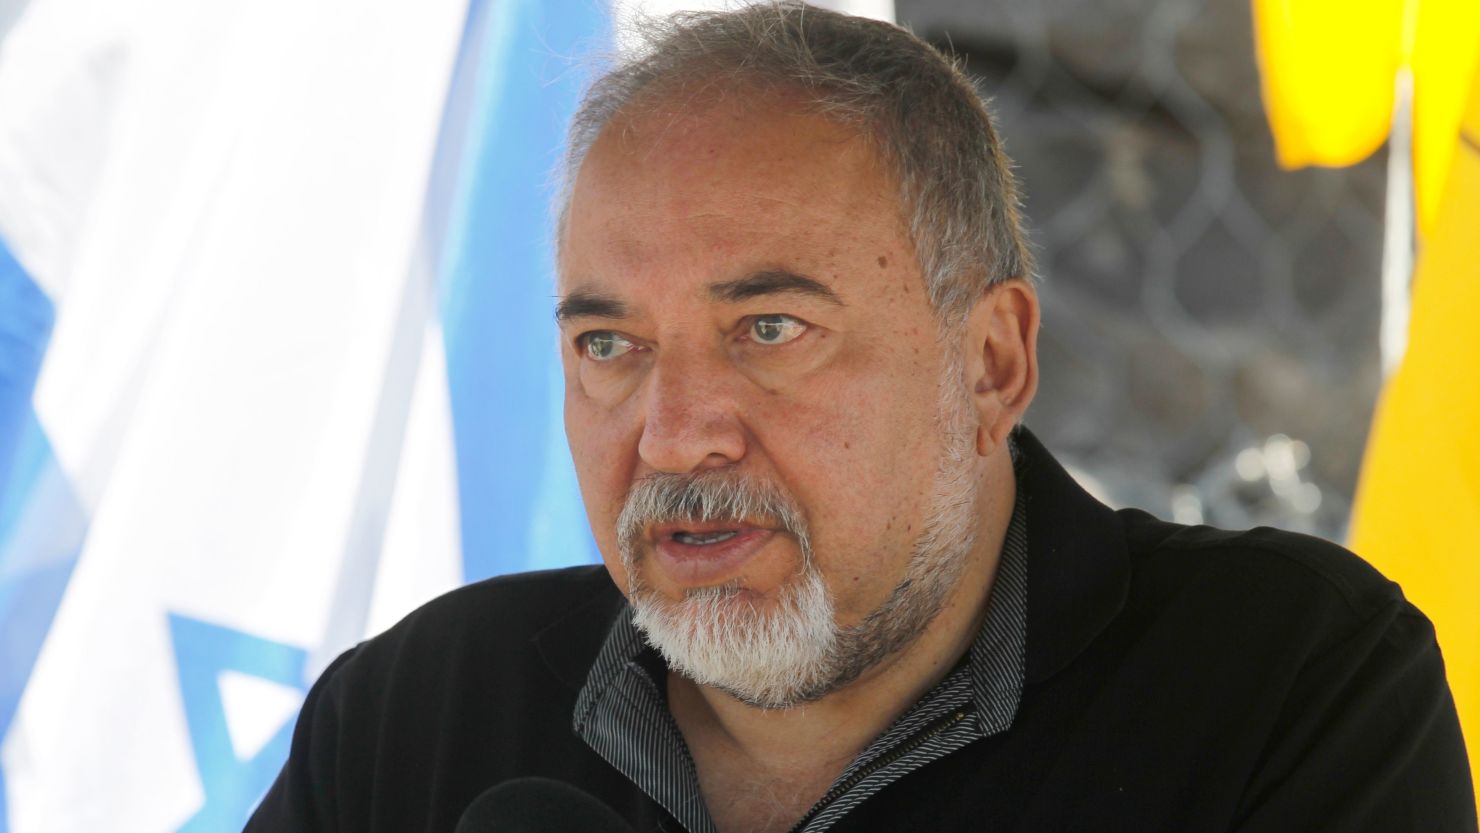 Israeli Defence Minister Avigdor Lieberman speaks to the press during a visit at the Israel-Syria border in the annexed Golan Heights on Tuesday.